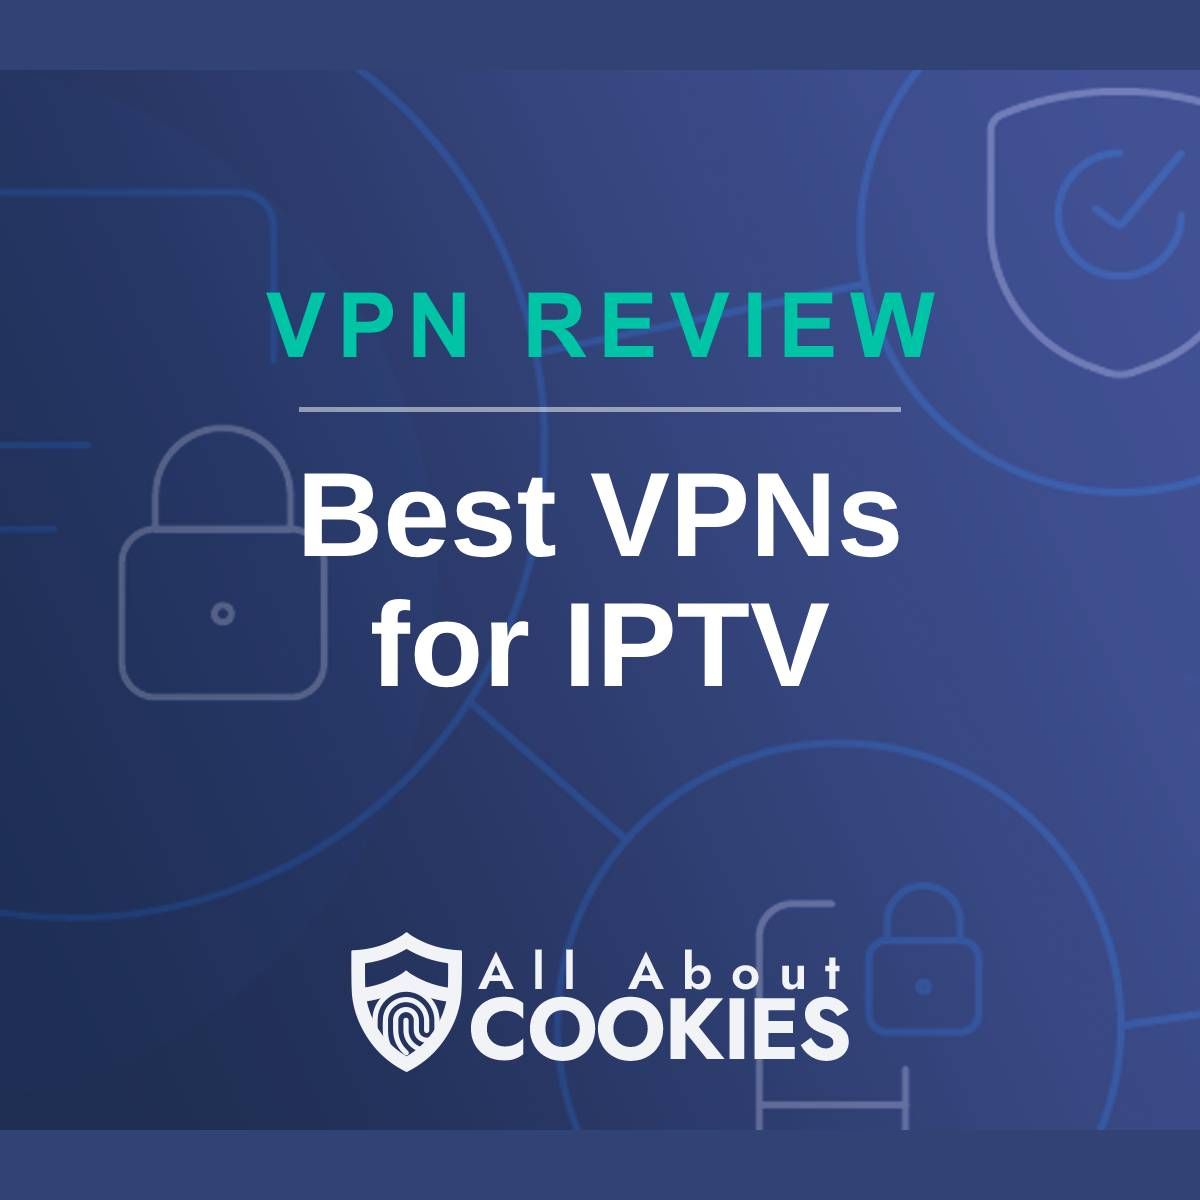 A blue background with images of locks and shields with the text &quot;VPN Review Best VPNs for IPTV&quot; and the All About Cookies logo. 